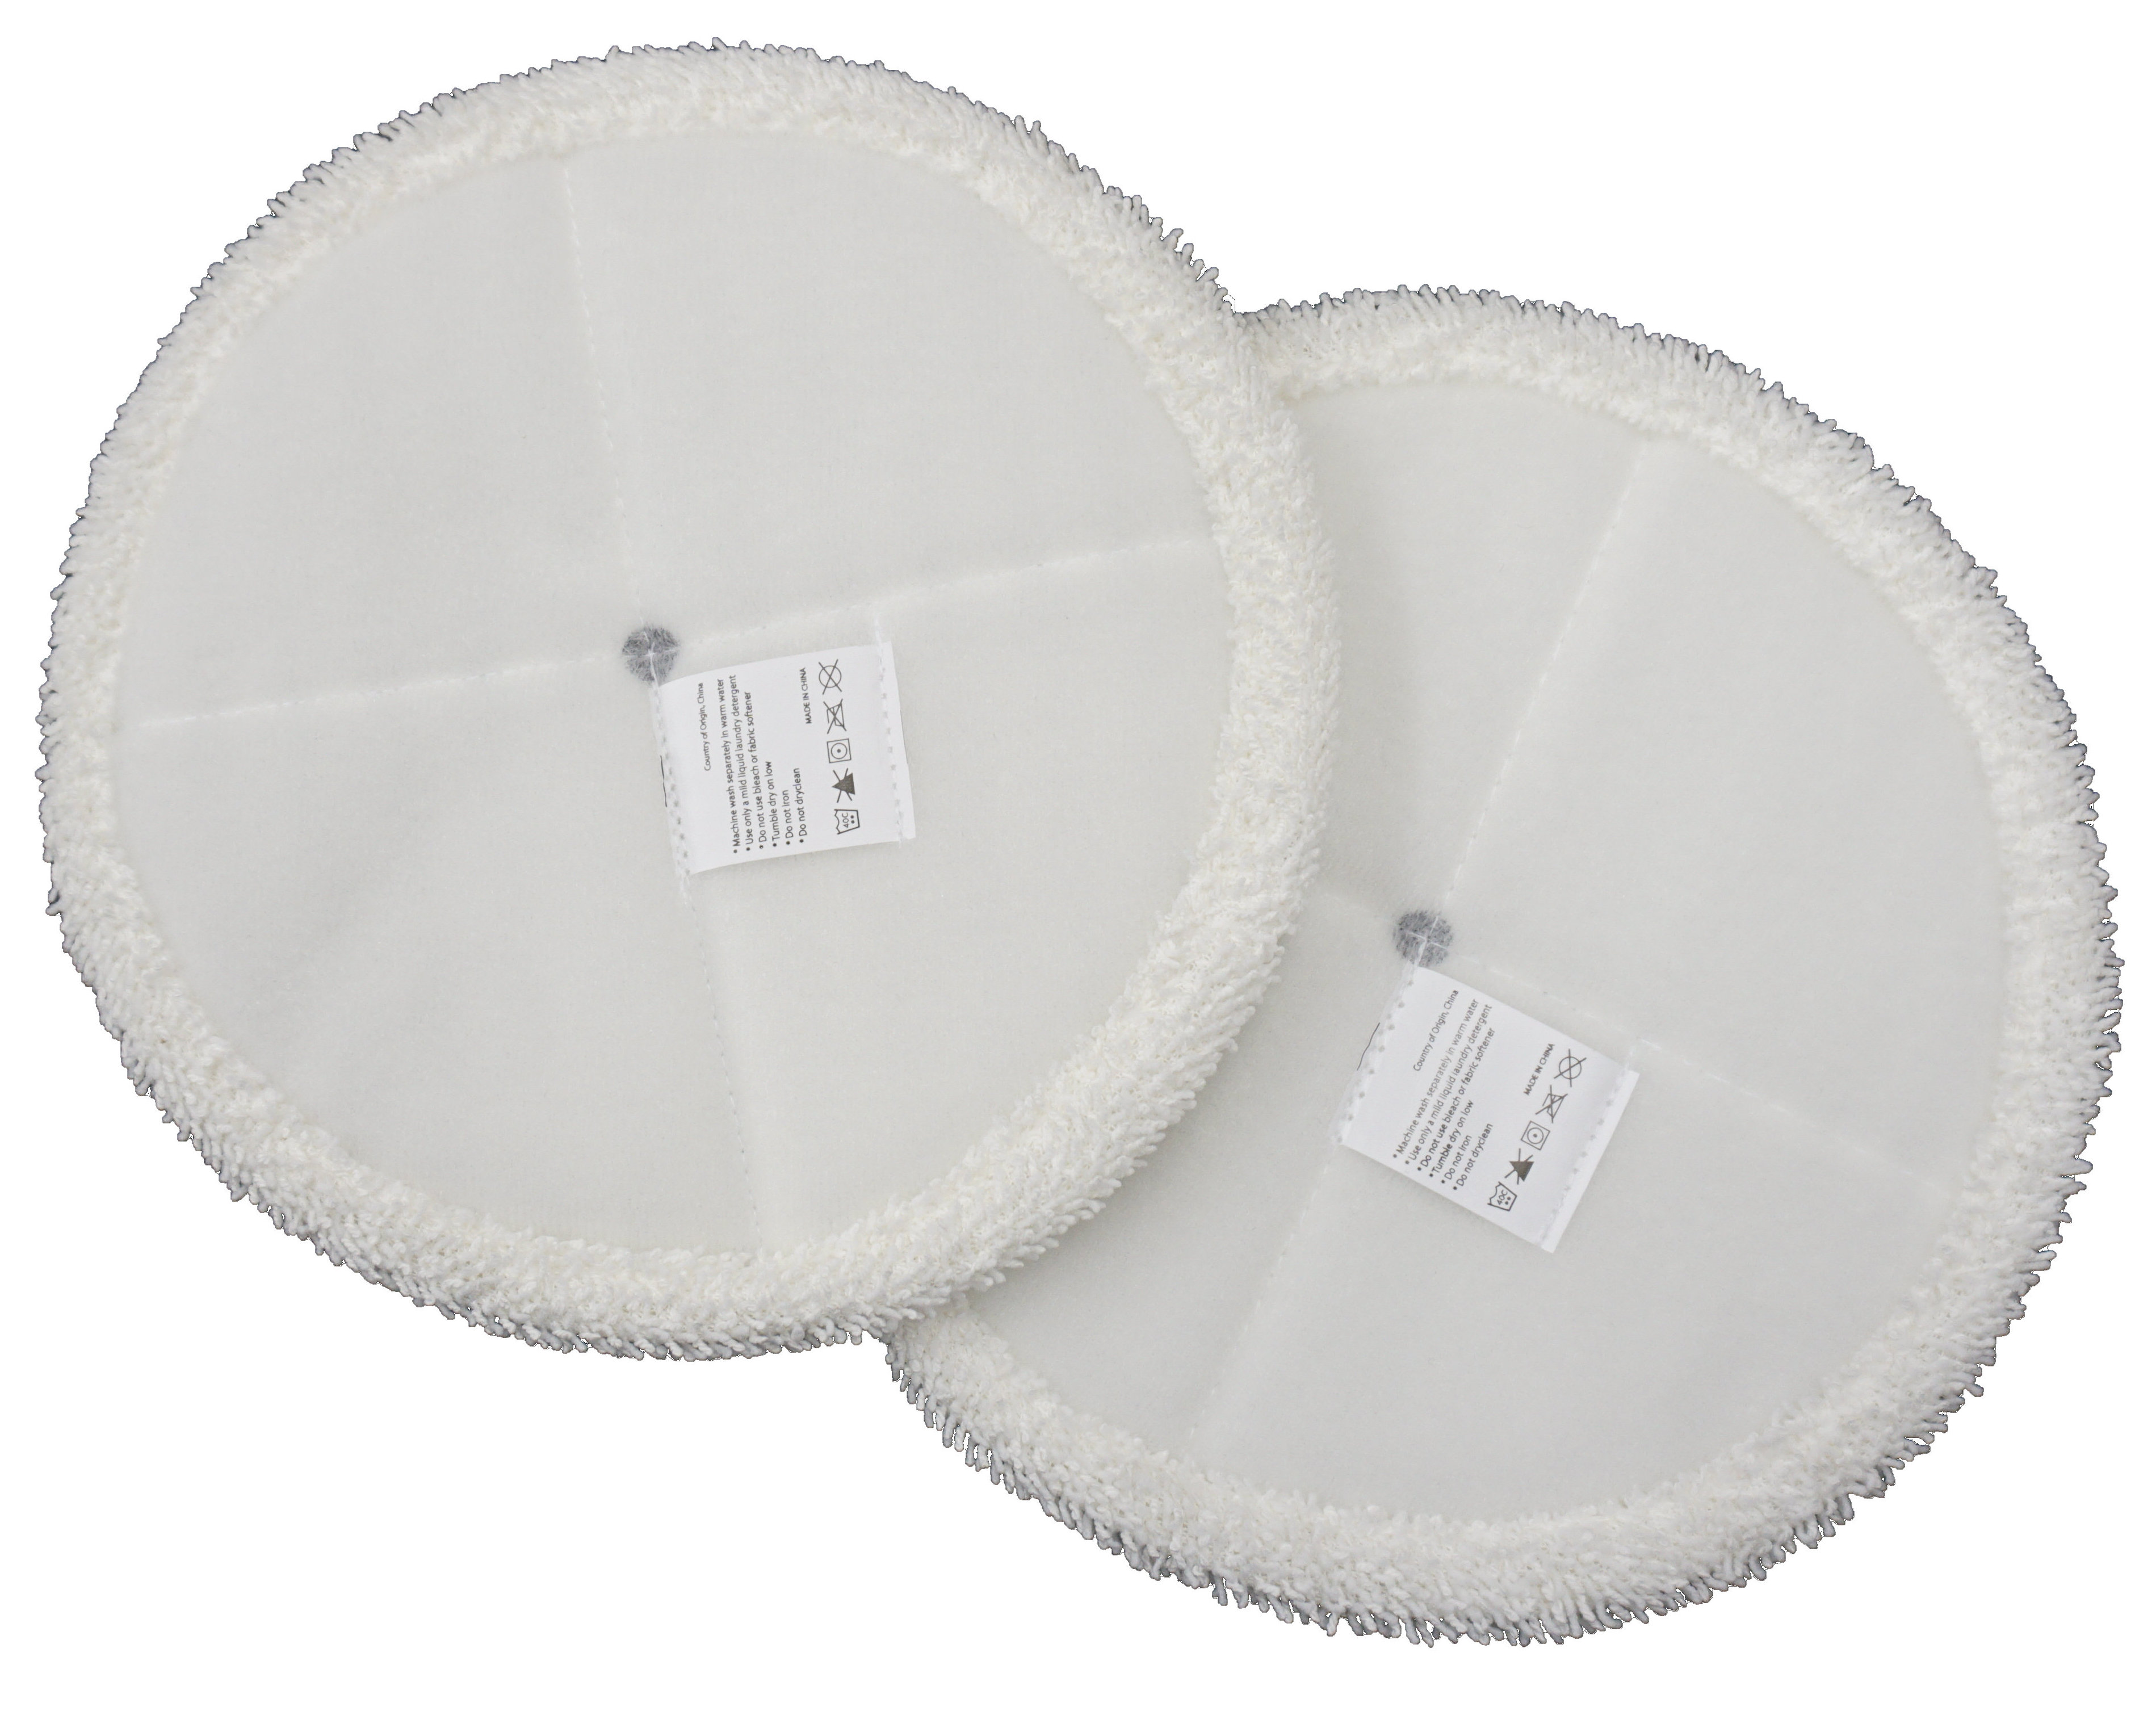 Bissell Scrubby Mop Pads, 5 Pack, 10 Pieces, for Spinwave Hard Floor, 1611298 - image 3 of 3